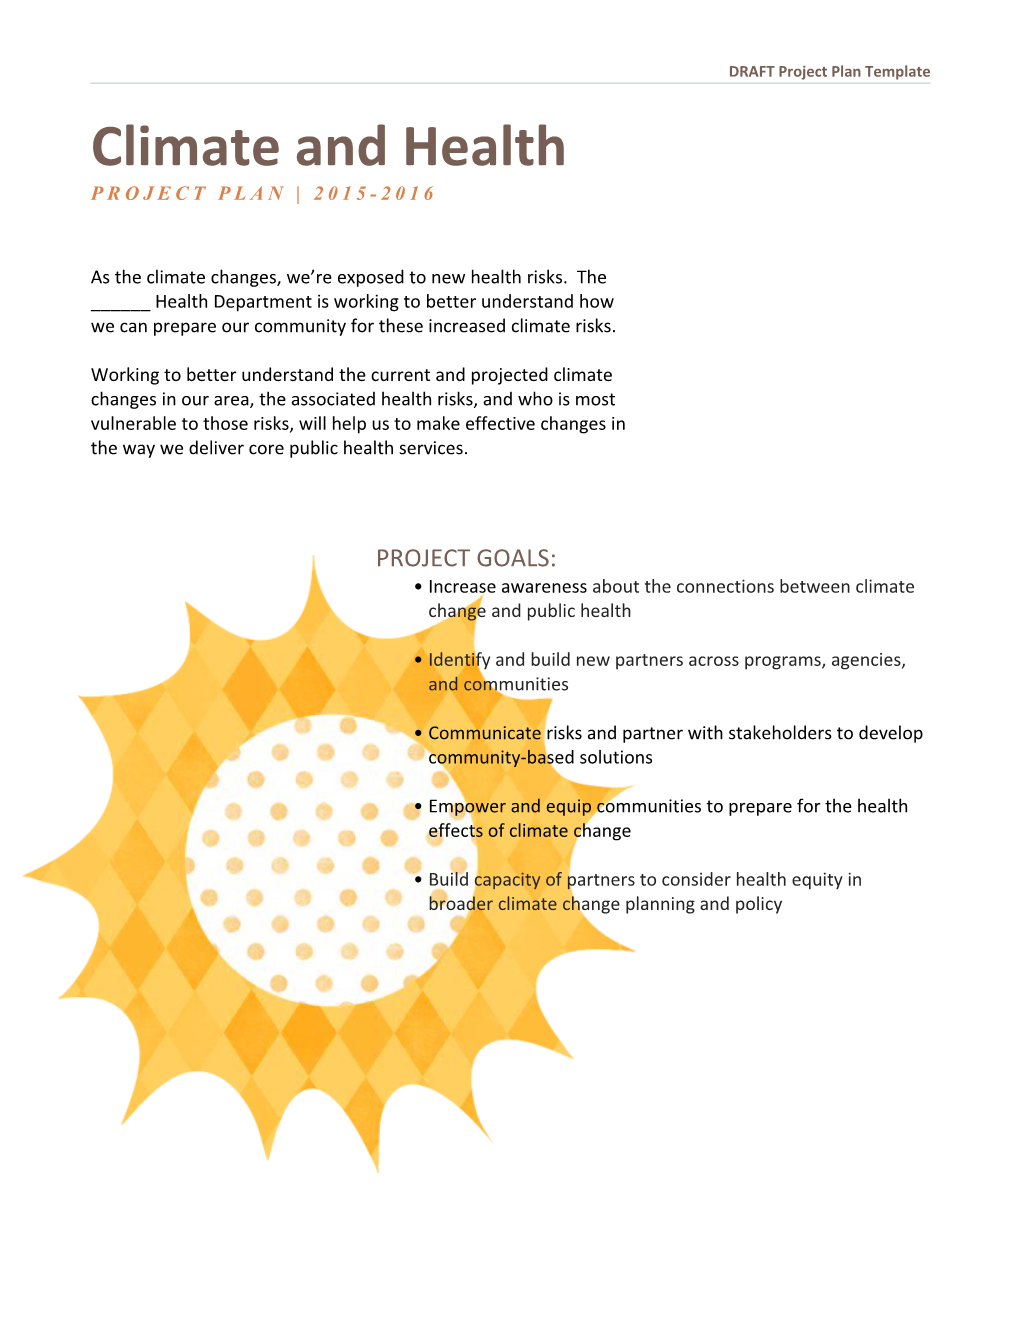 Climate and Health Project Plan Template